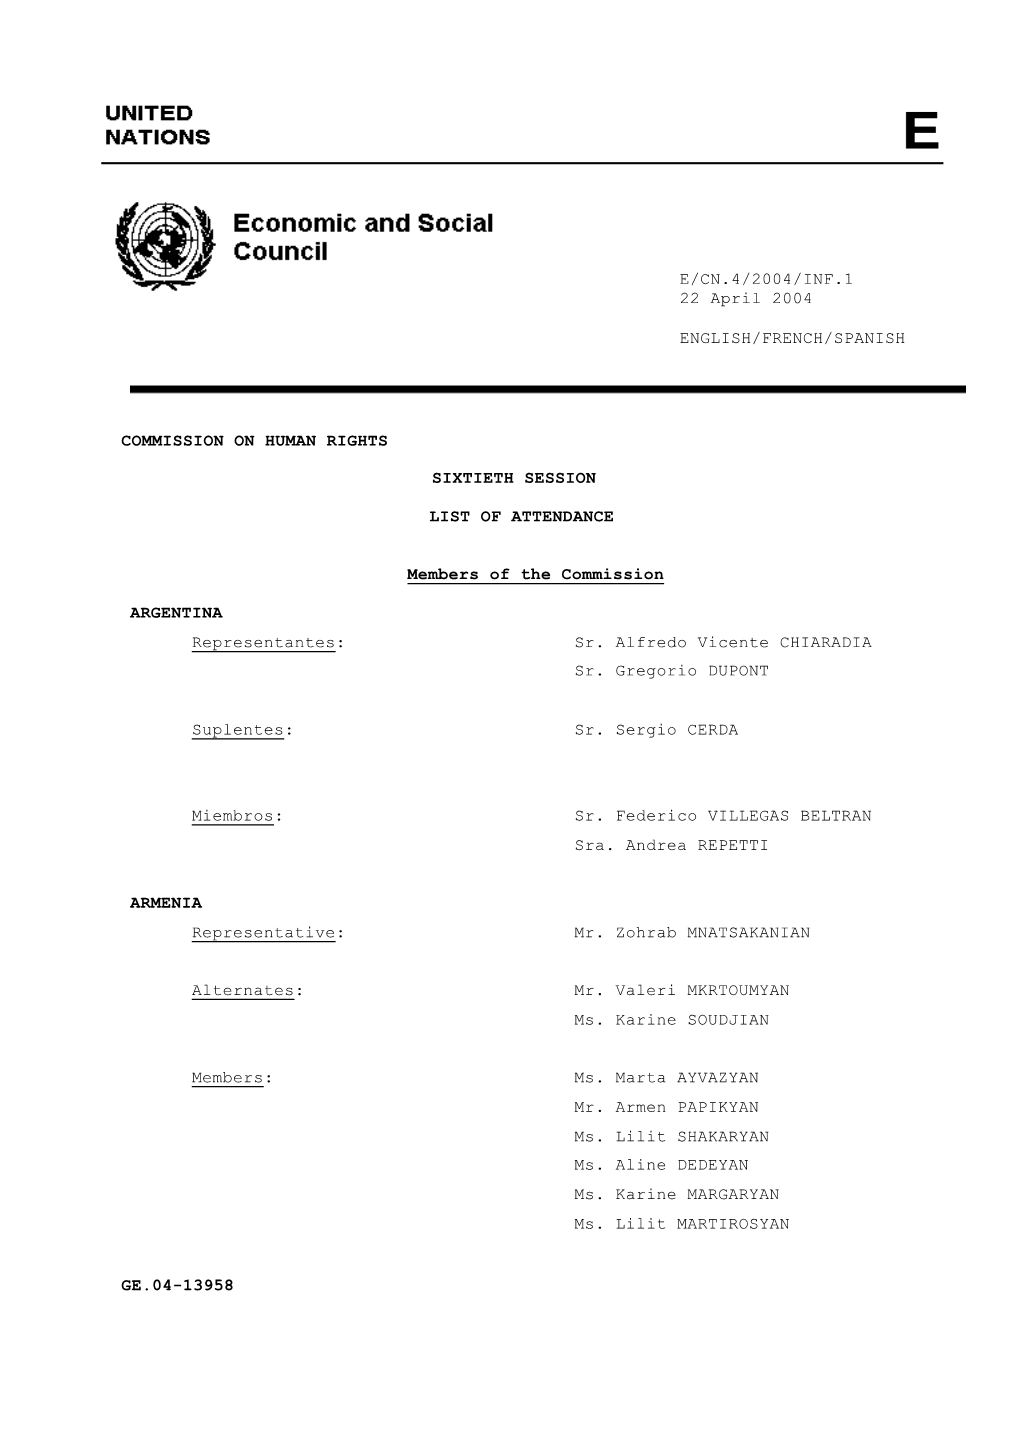 JK E/CN.4/2004/INF.1 22 April 2004 ENGLISH/FRENCH/SPANISH COMMISSION on HUMAN RIGHTS SIXTIETH SESSION LIST of ATTENDANCE Member